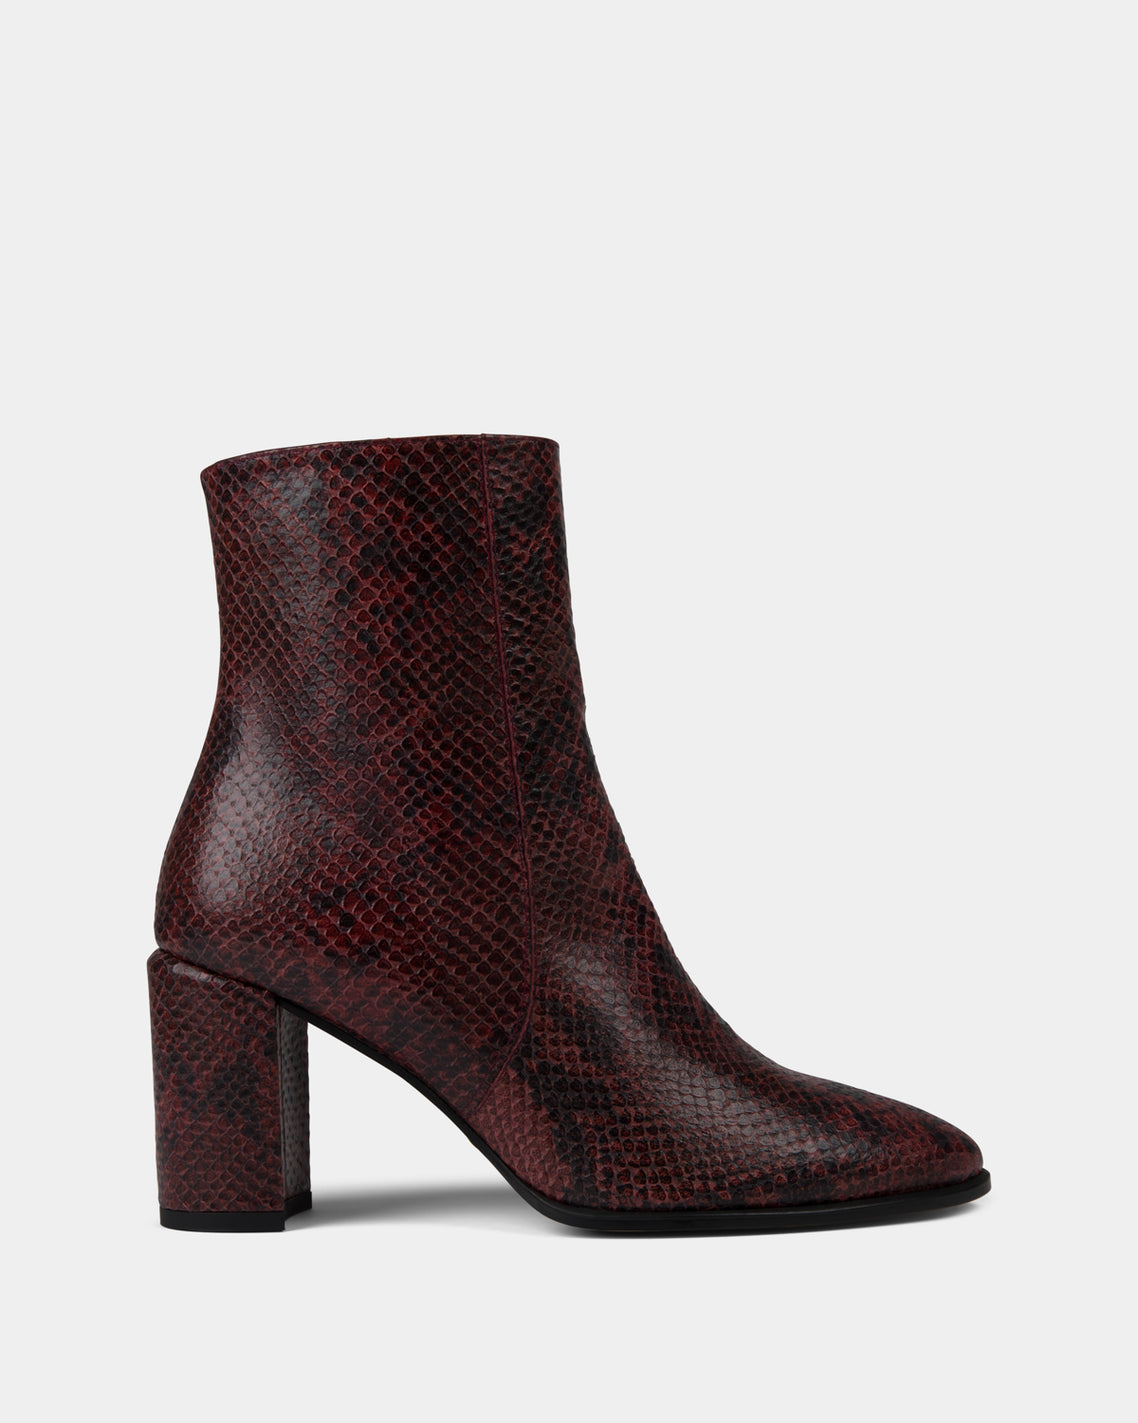 kallu-kallú-burgundy-nappa-leather-shoes-for-women-made-in-spain-boots-ankle-boots-booties-low-cut-boots